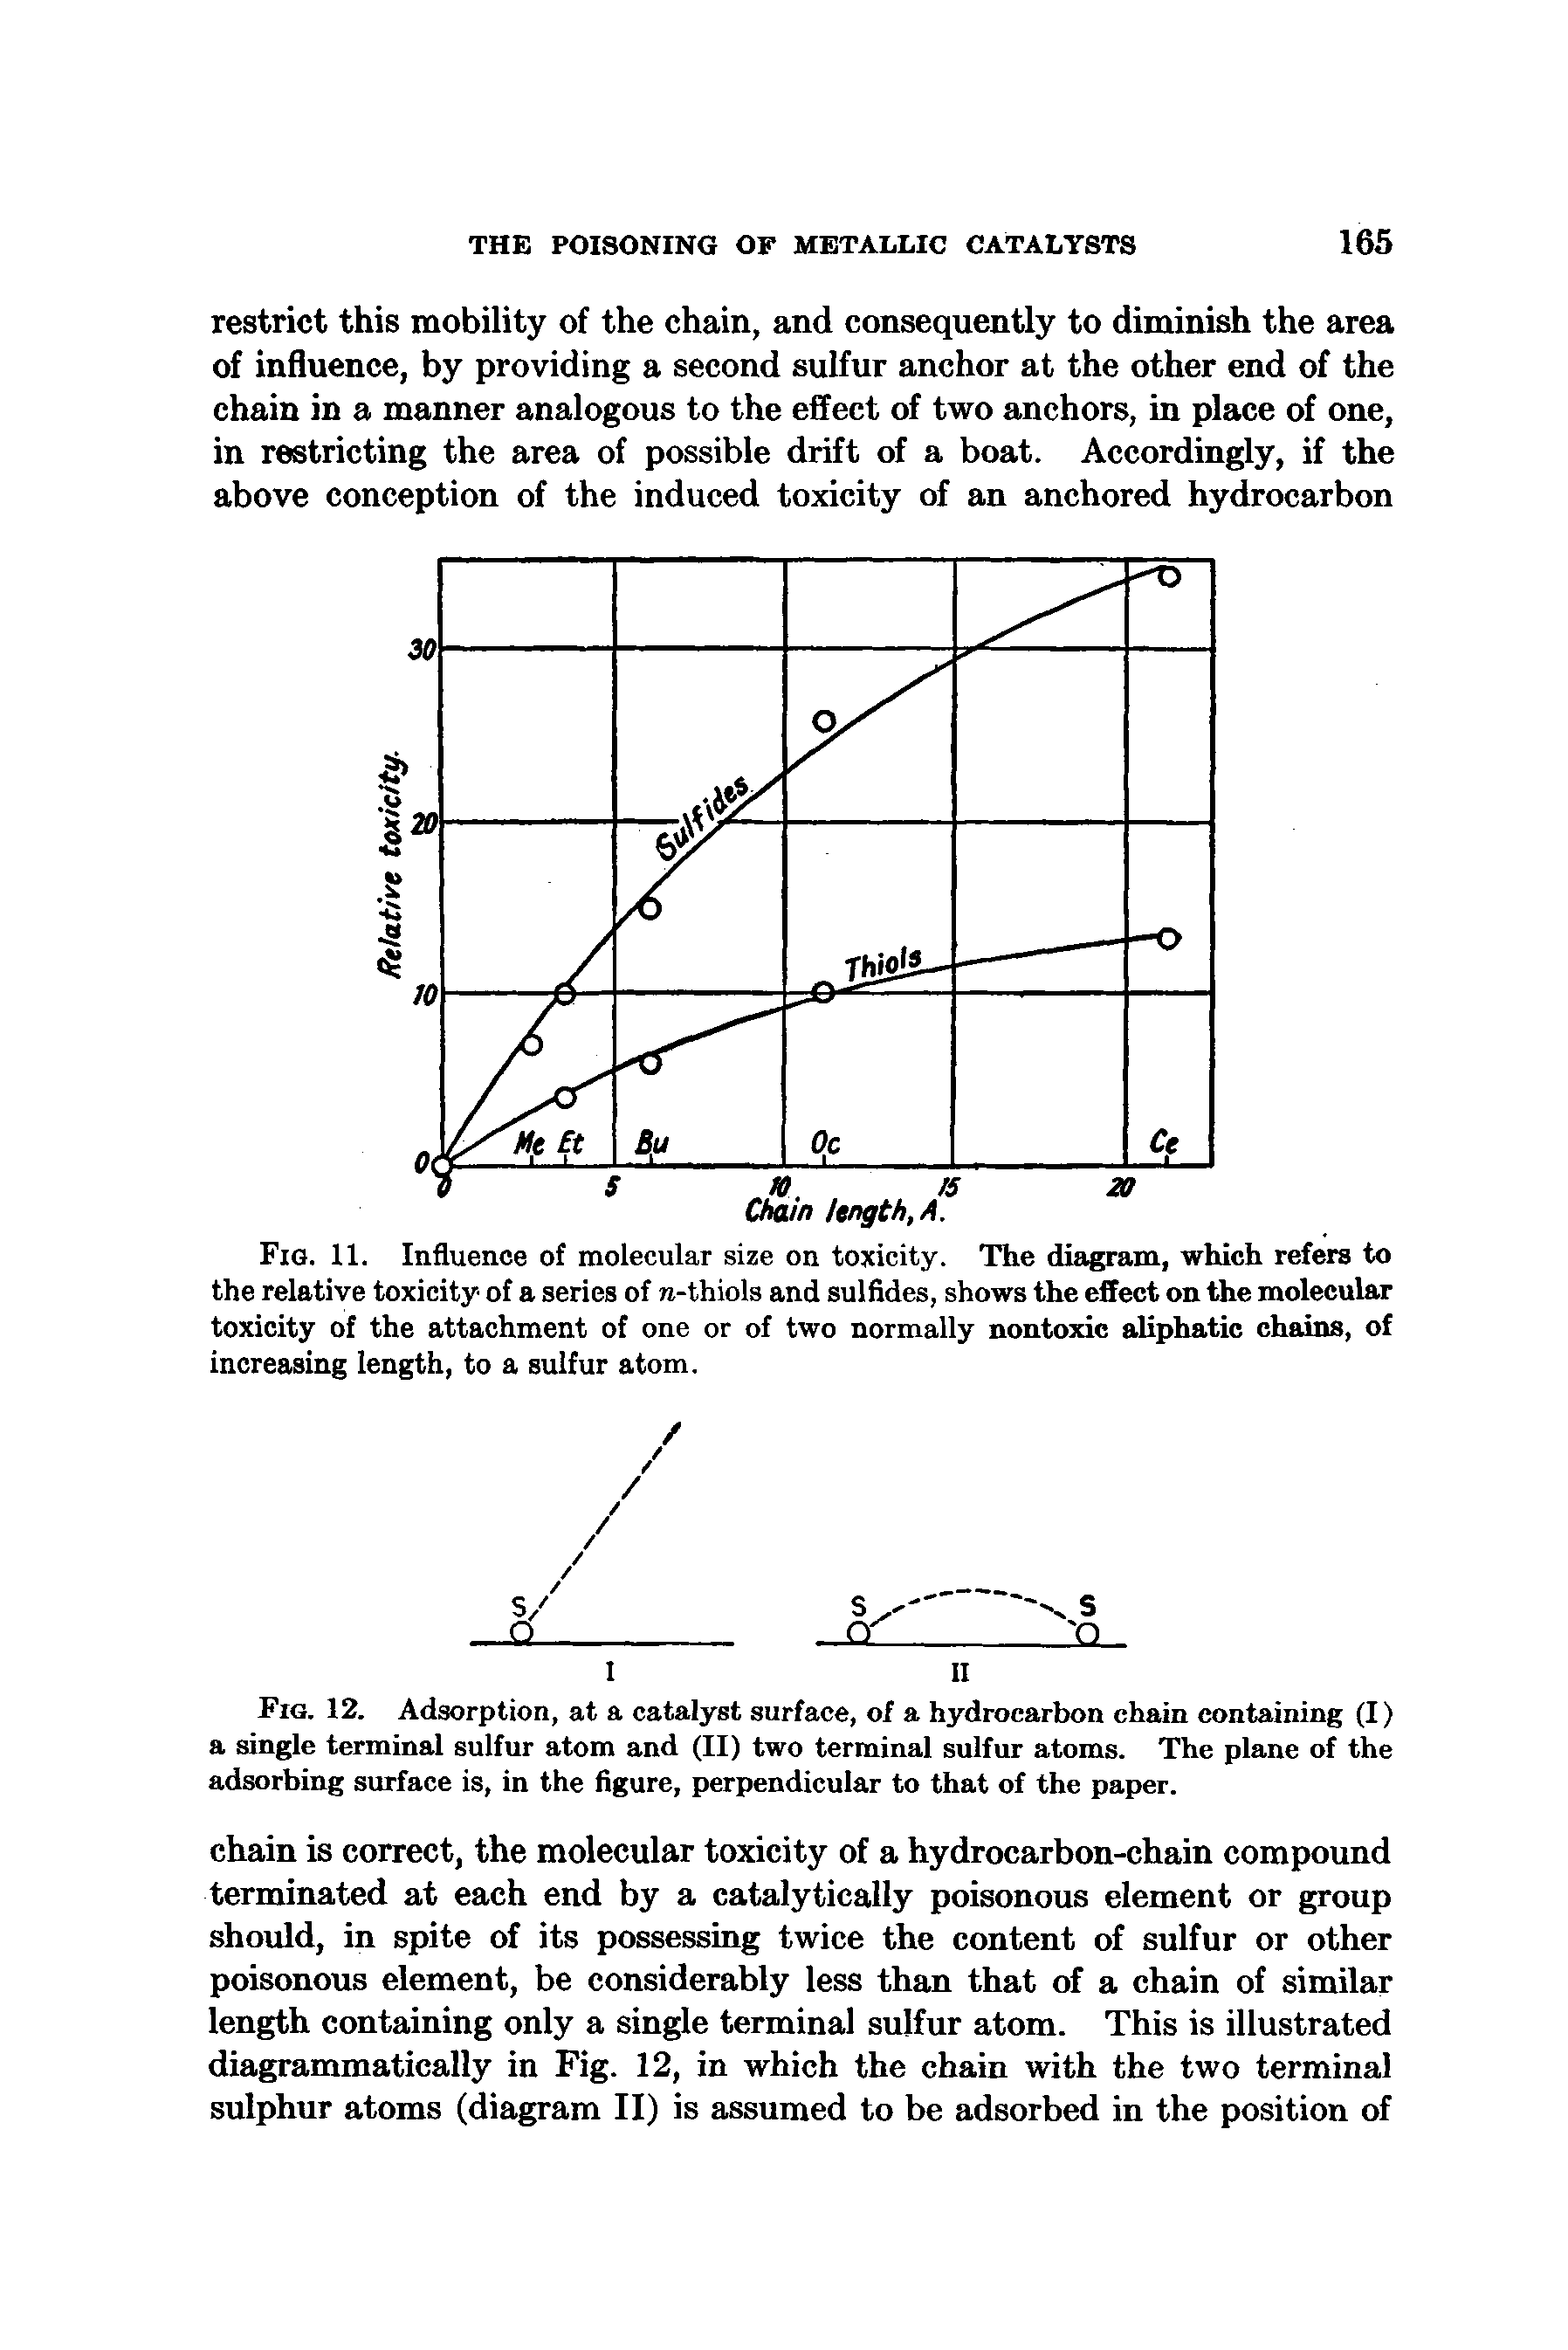 Fig. 11. Influence of molecular size on toxicity. The diagram, which refers to the relative toxicity of a series of ra-thiols and sulfides, shows the effect on the molecular toxicity of the attachment of one or of two normally nontoxic aliphatic chains, of increasing length, to a sulfur atom.